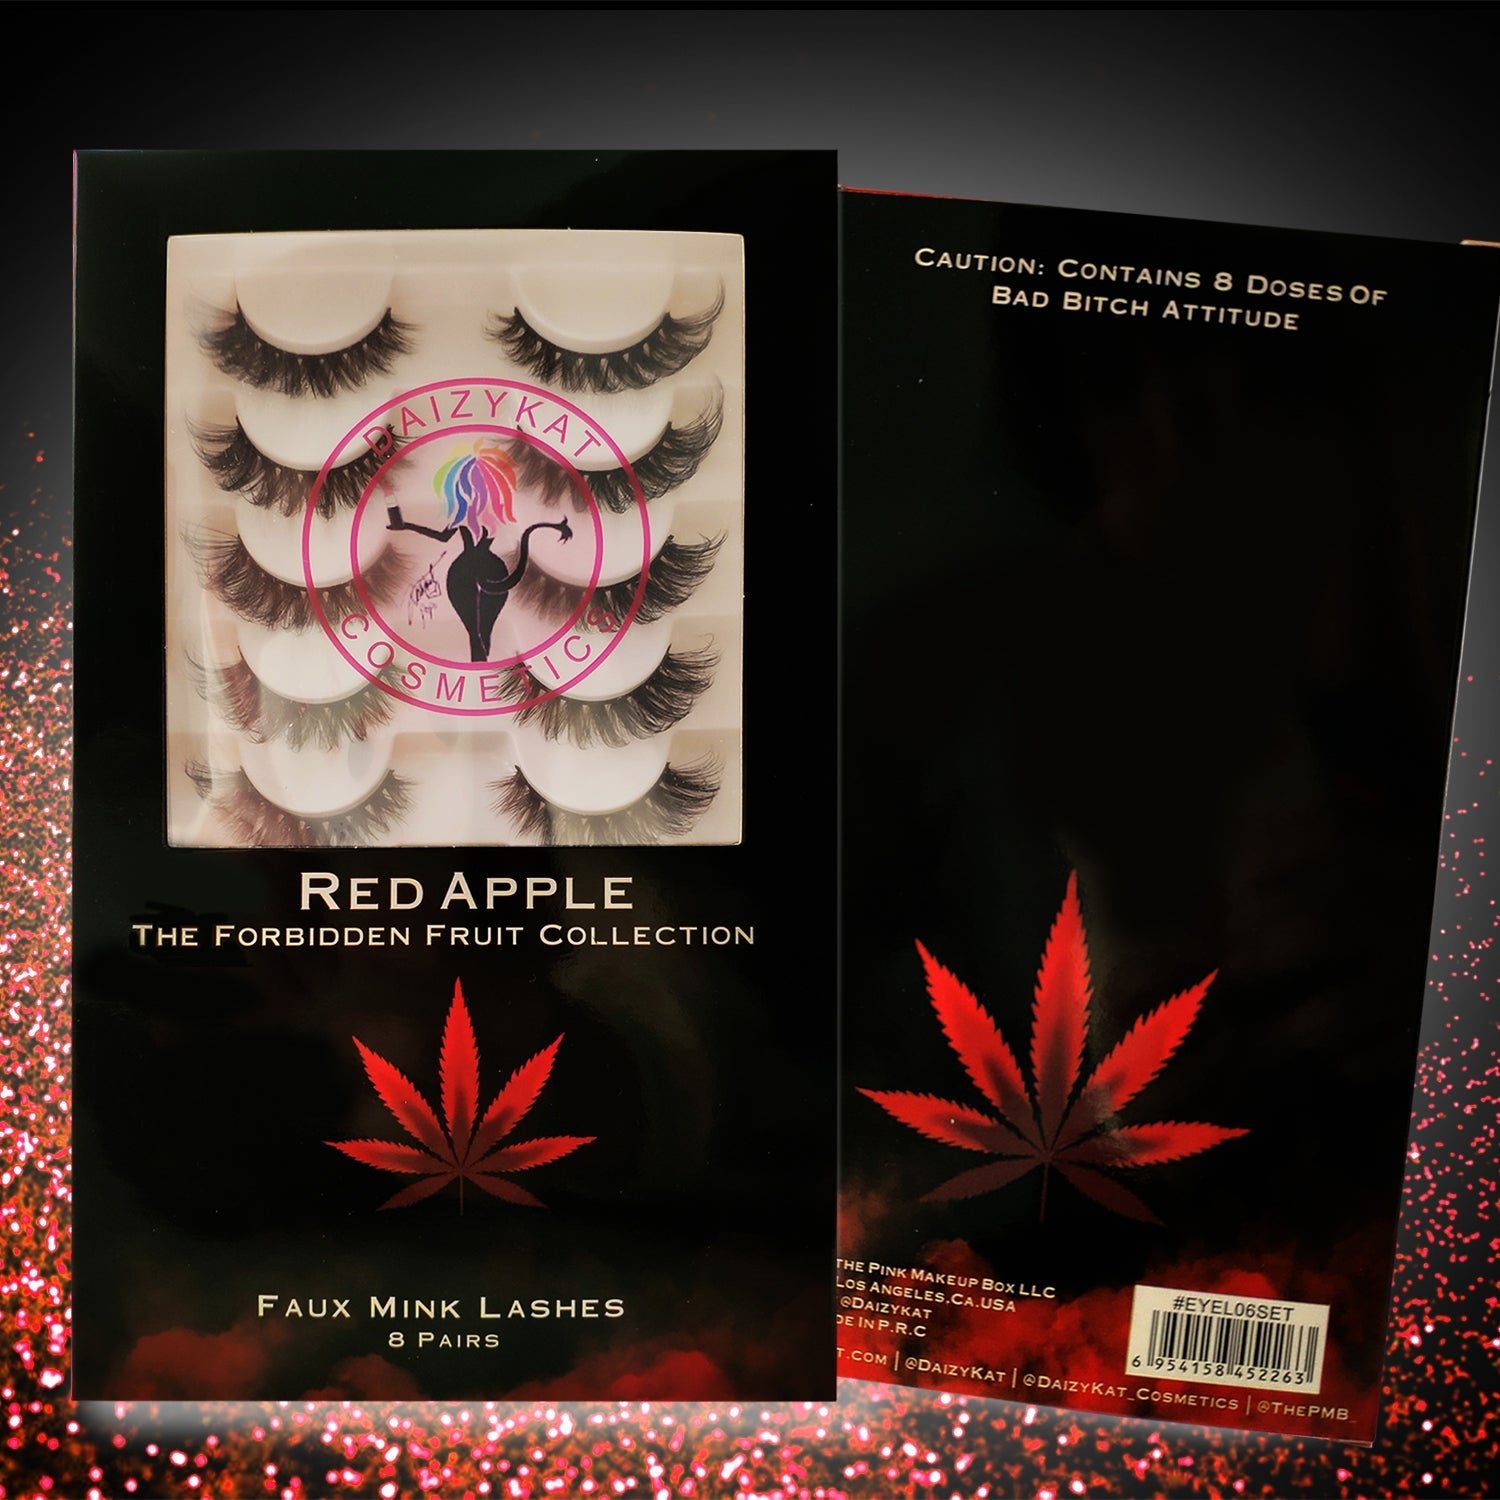 Red Apple Lashes (8 PAIRS) - DaizyKat Cosmetics Red Apple Lashes (8 PAIRS) DaizyKat Cosmetics Eyelashes